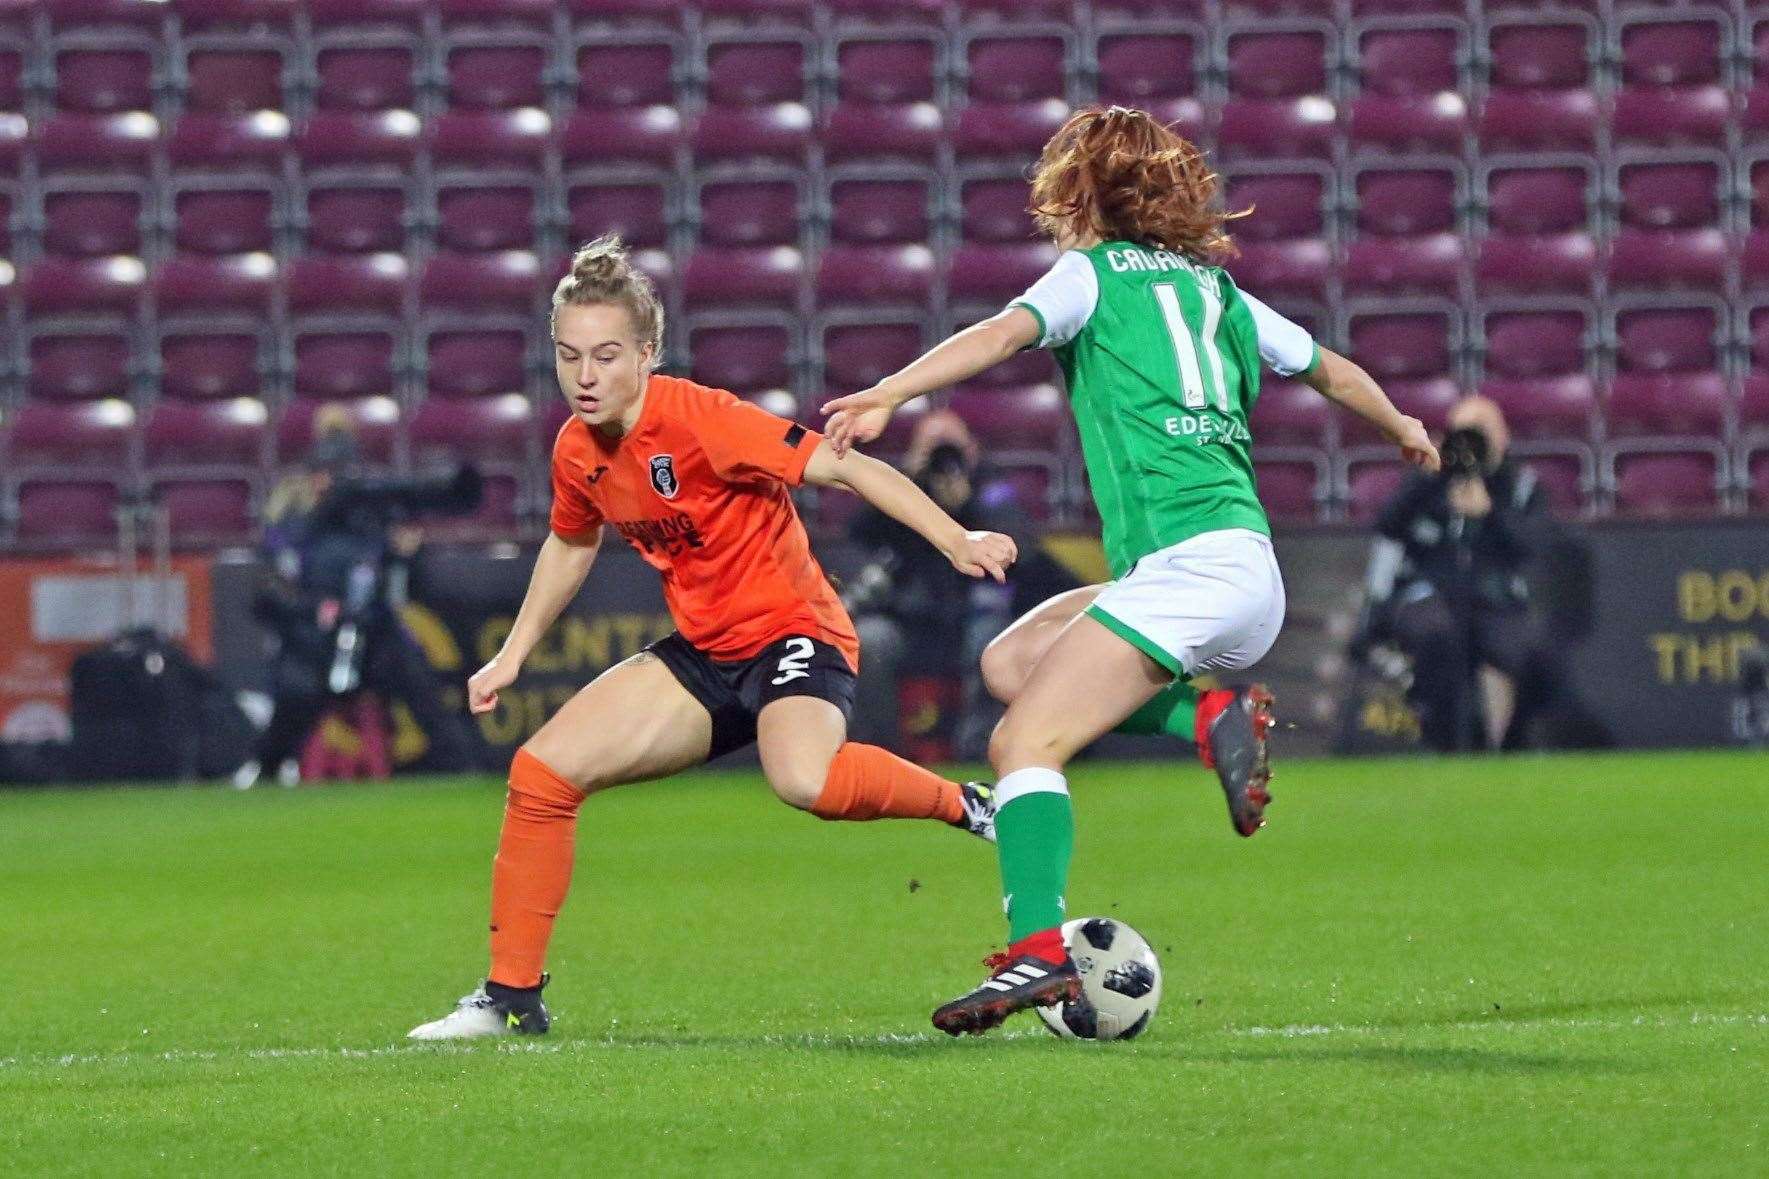 Rachel McLauchlan watches her opposite number closely as Glasgow City takes on Hibernian during the 2019 Scottish Cup final. Picture: Tommy Hughes